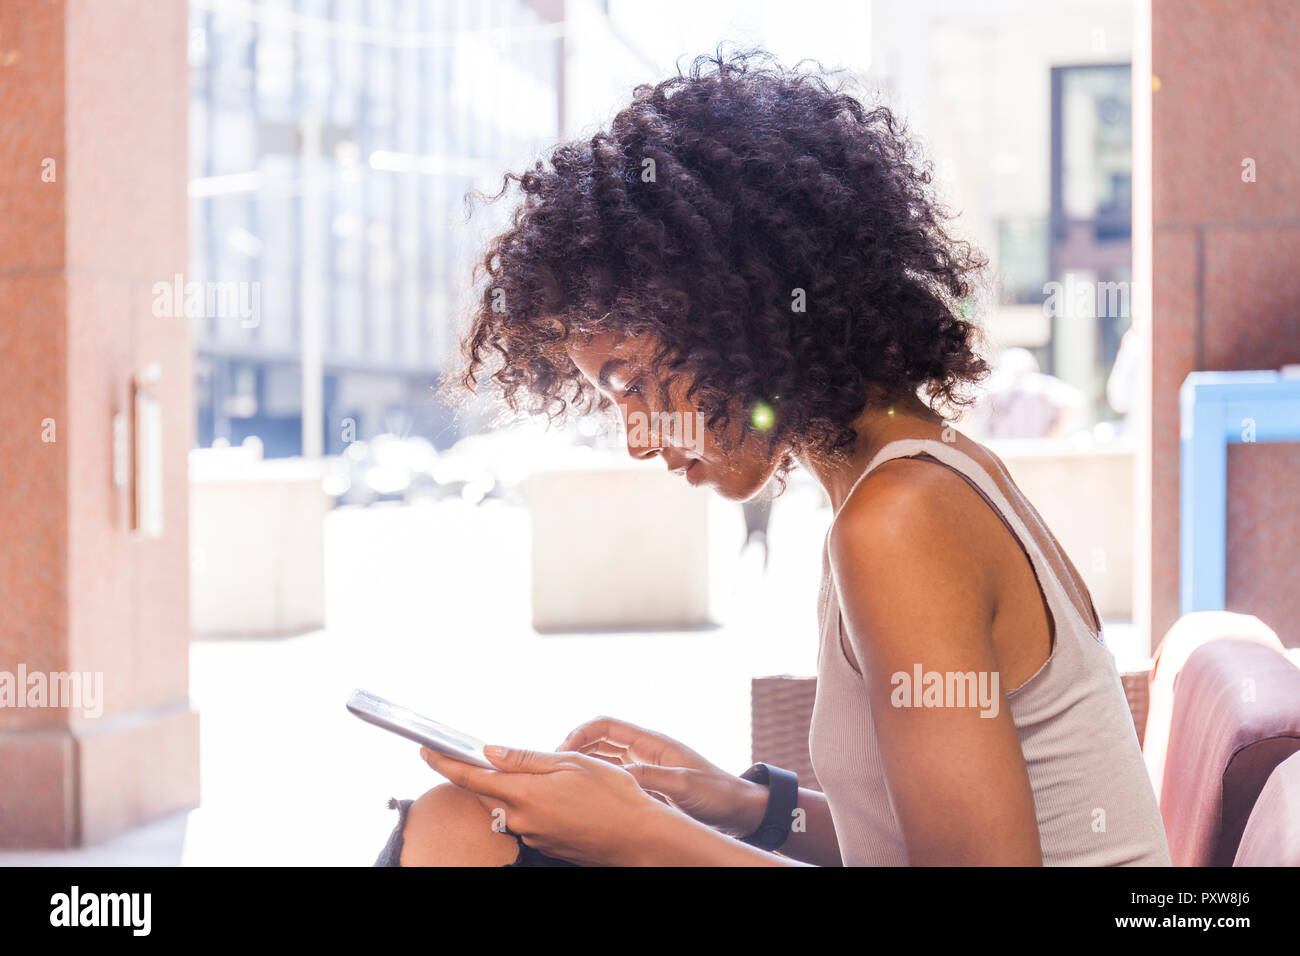 Young woman with curly hair sitting at sidewalk cafe using digital tablet Stock Photo